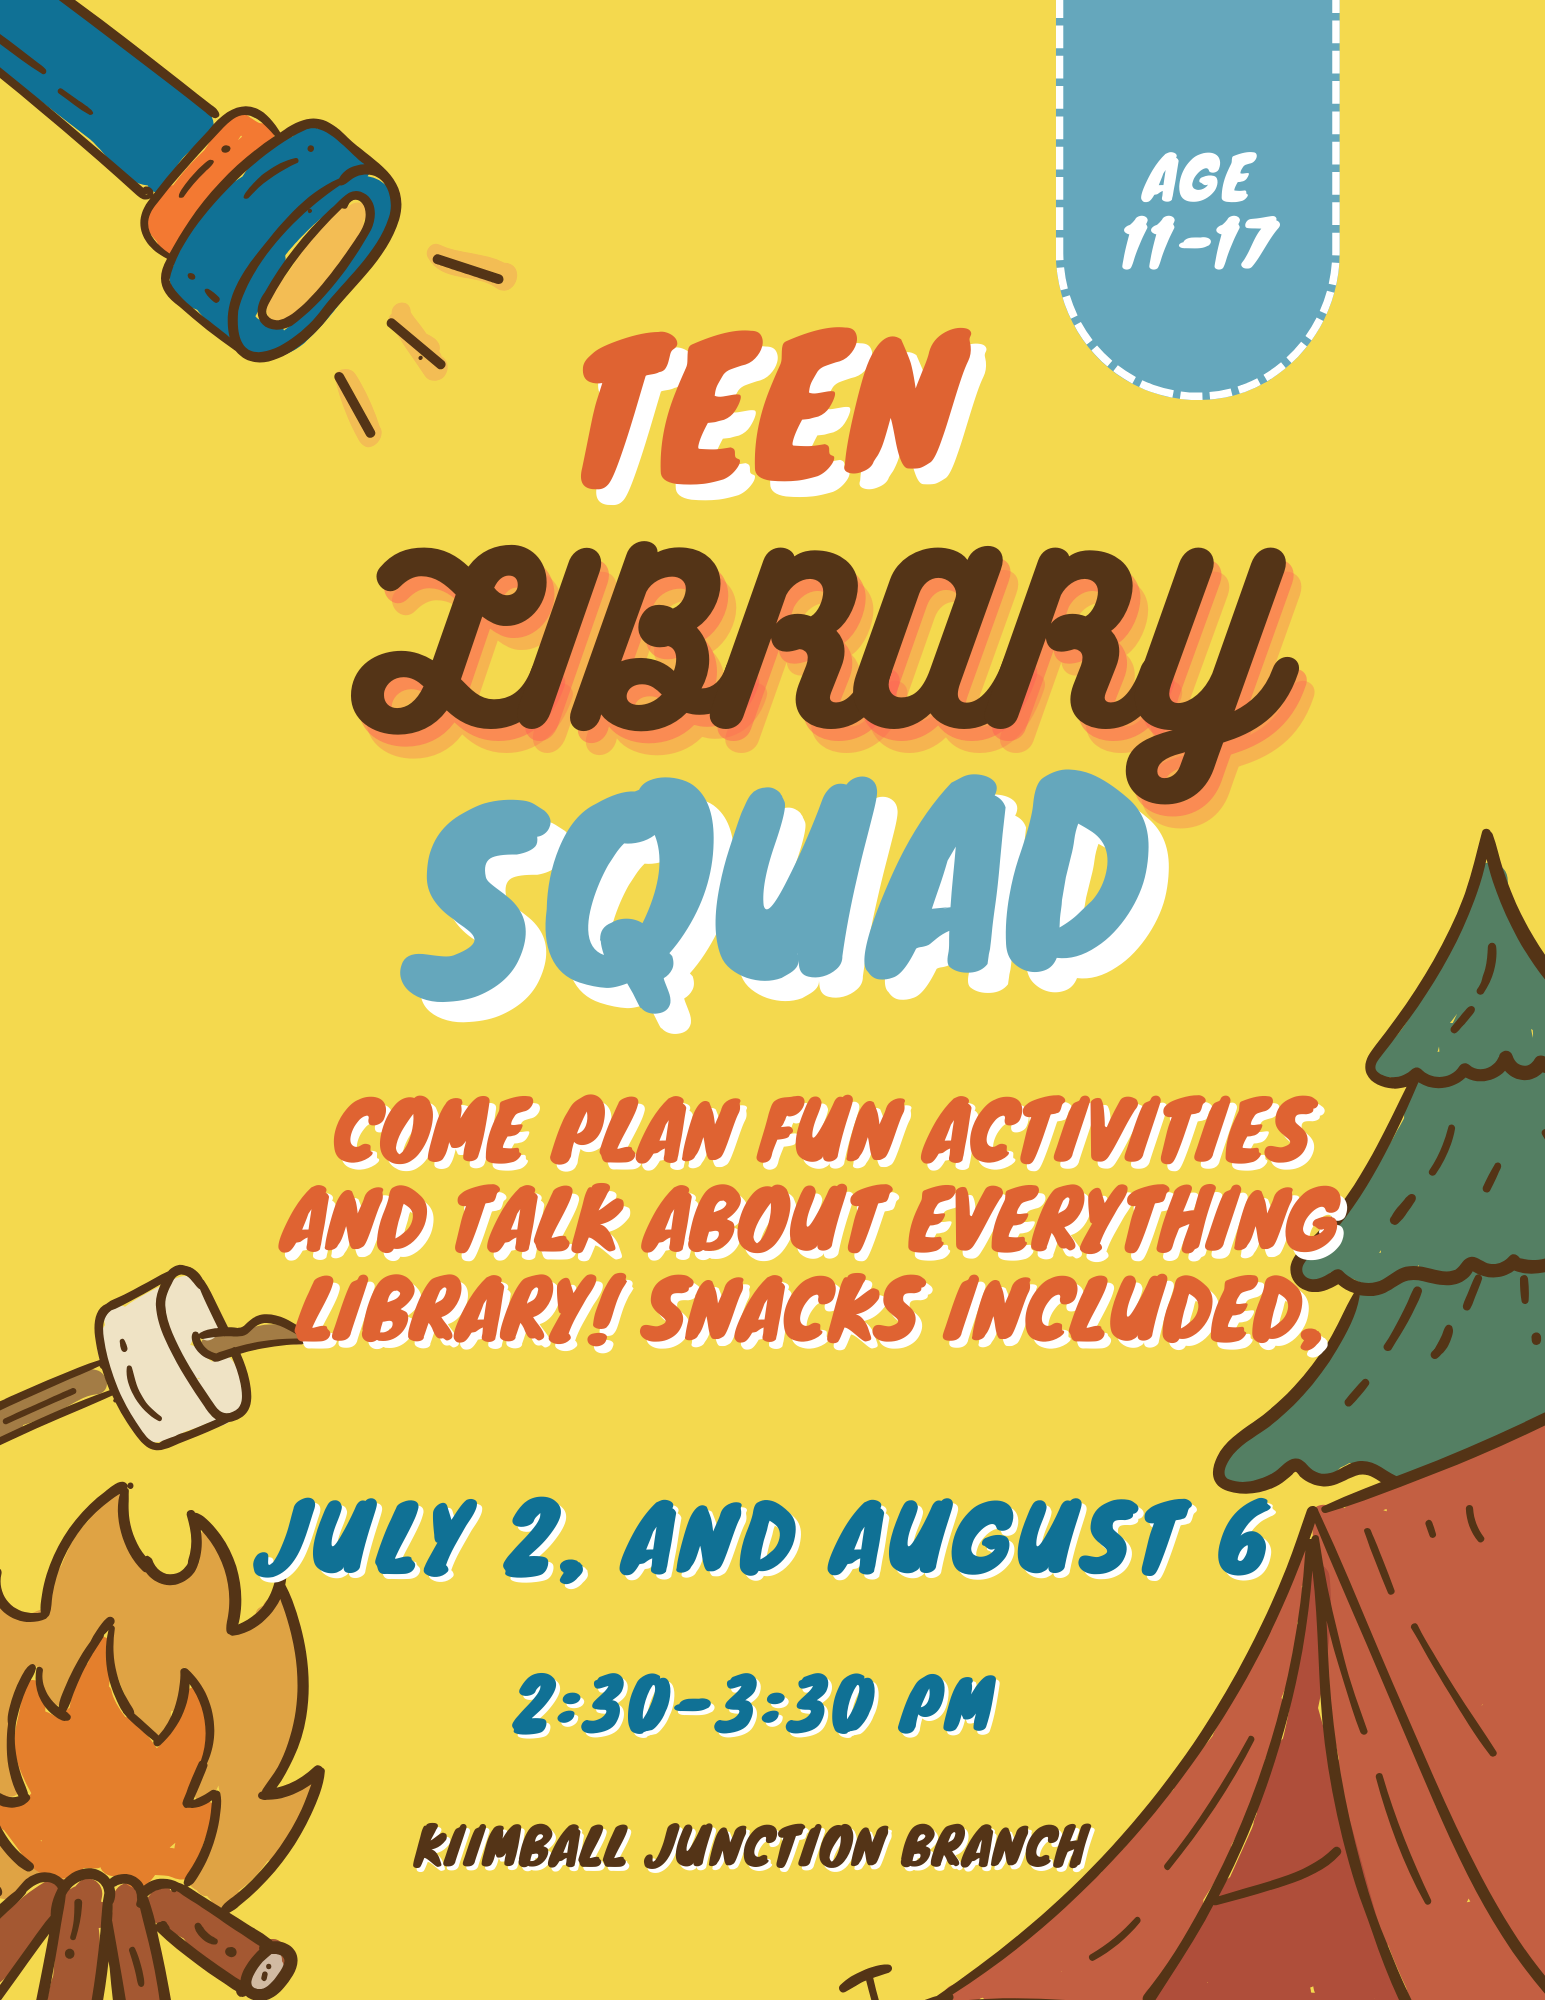 Teen Library Squad at Kimball Junction!